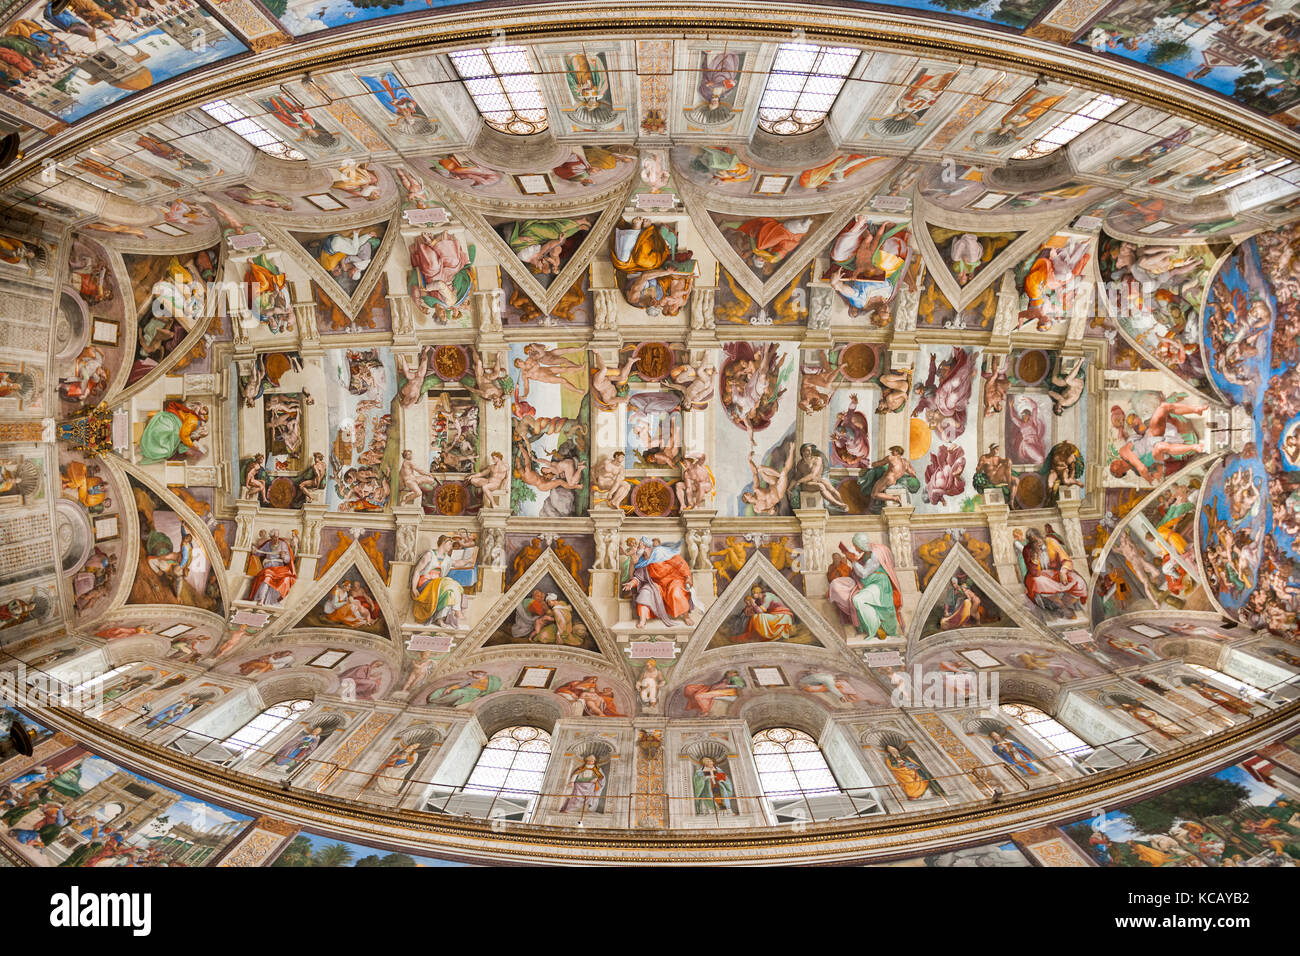 Ceiling of the Sistine Chapel in the Vatican in Rome. Stock Photo